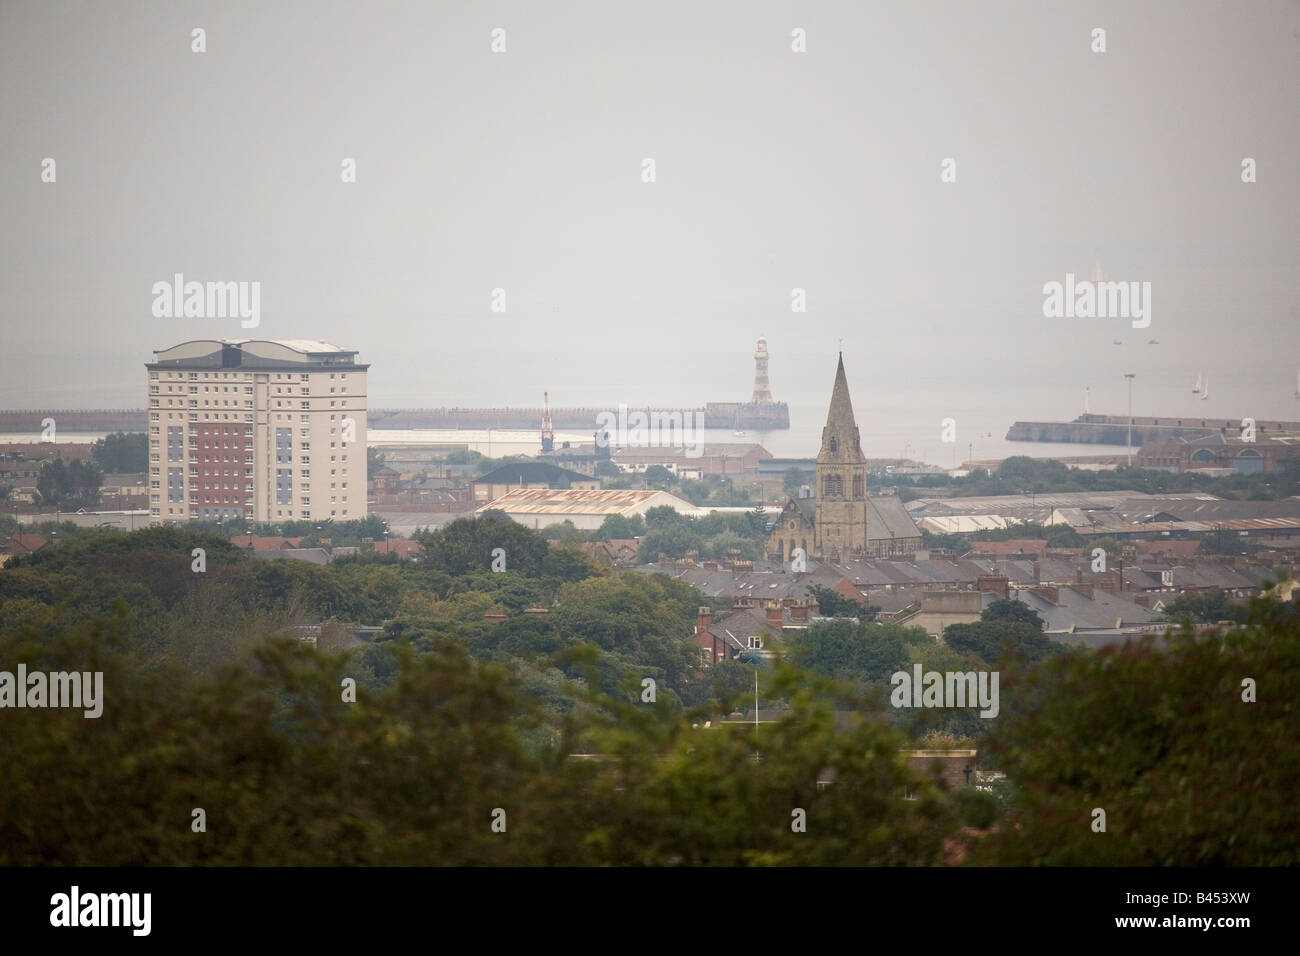 Two aspects of Sunderland, England. The city has both heavy industry and high rise housing and green parks. Stock Photo